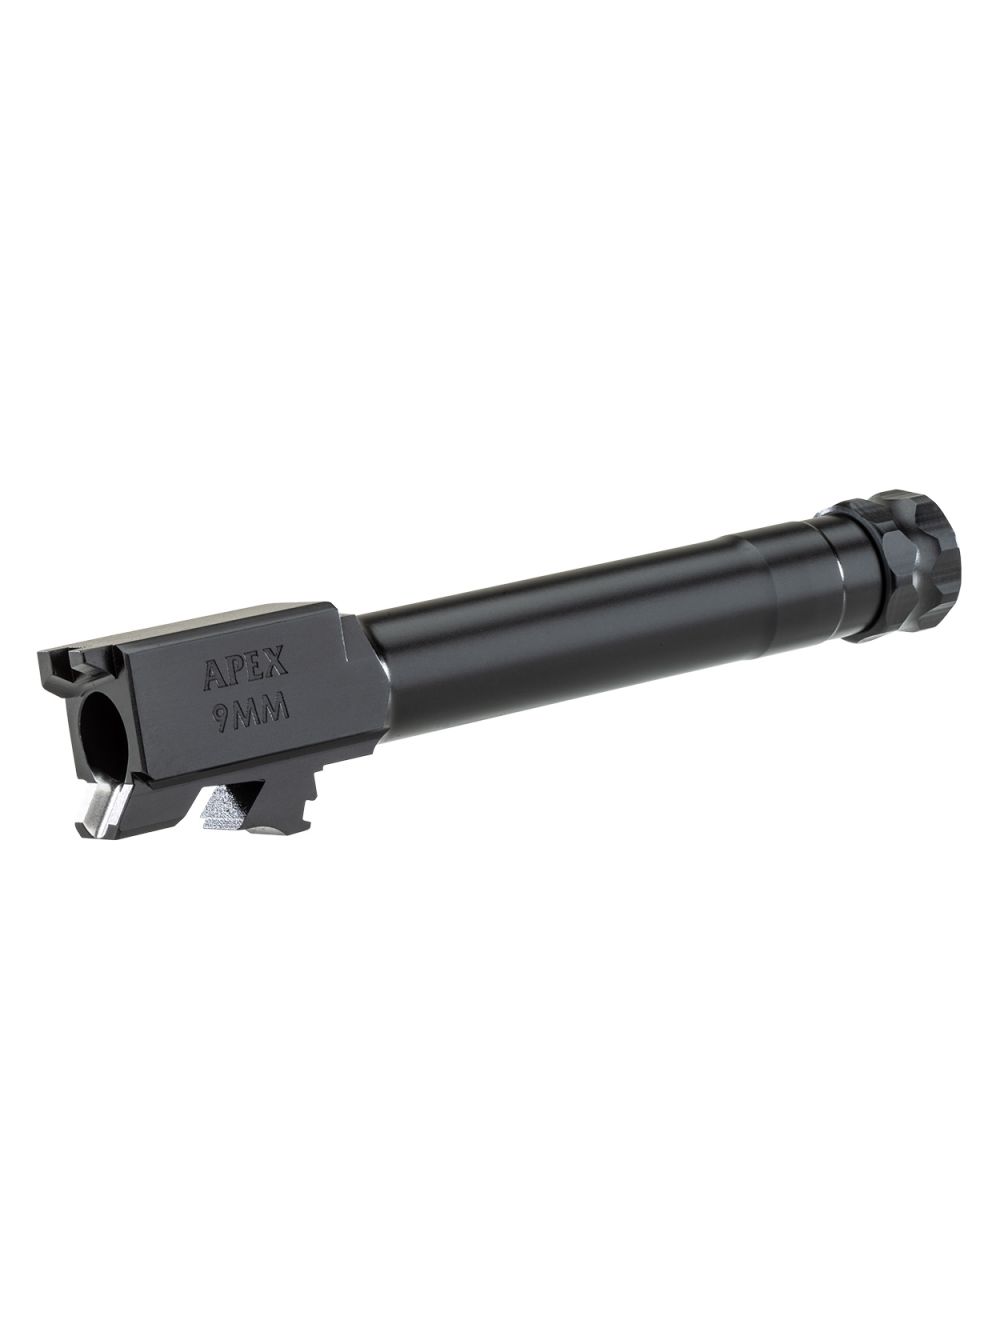 Apex 9mm Barrel for SD9 and SD9 VE